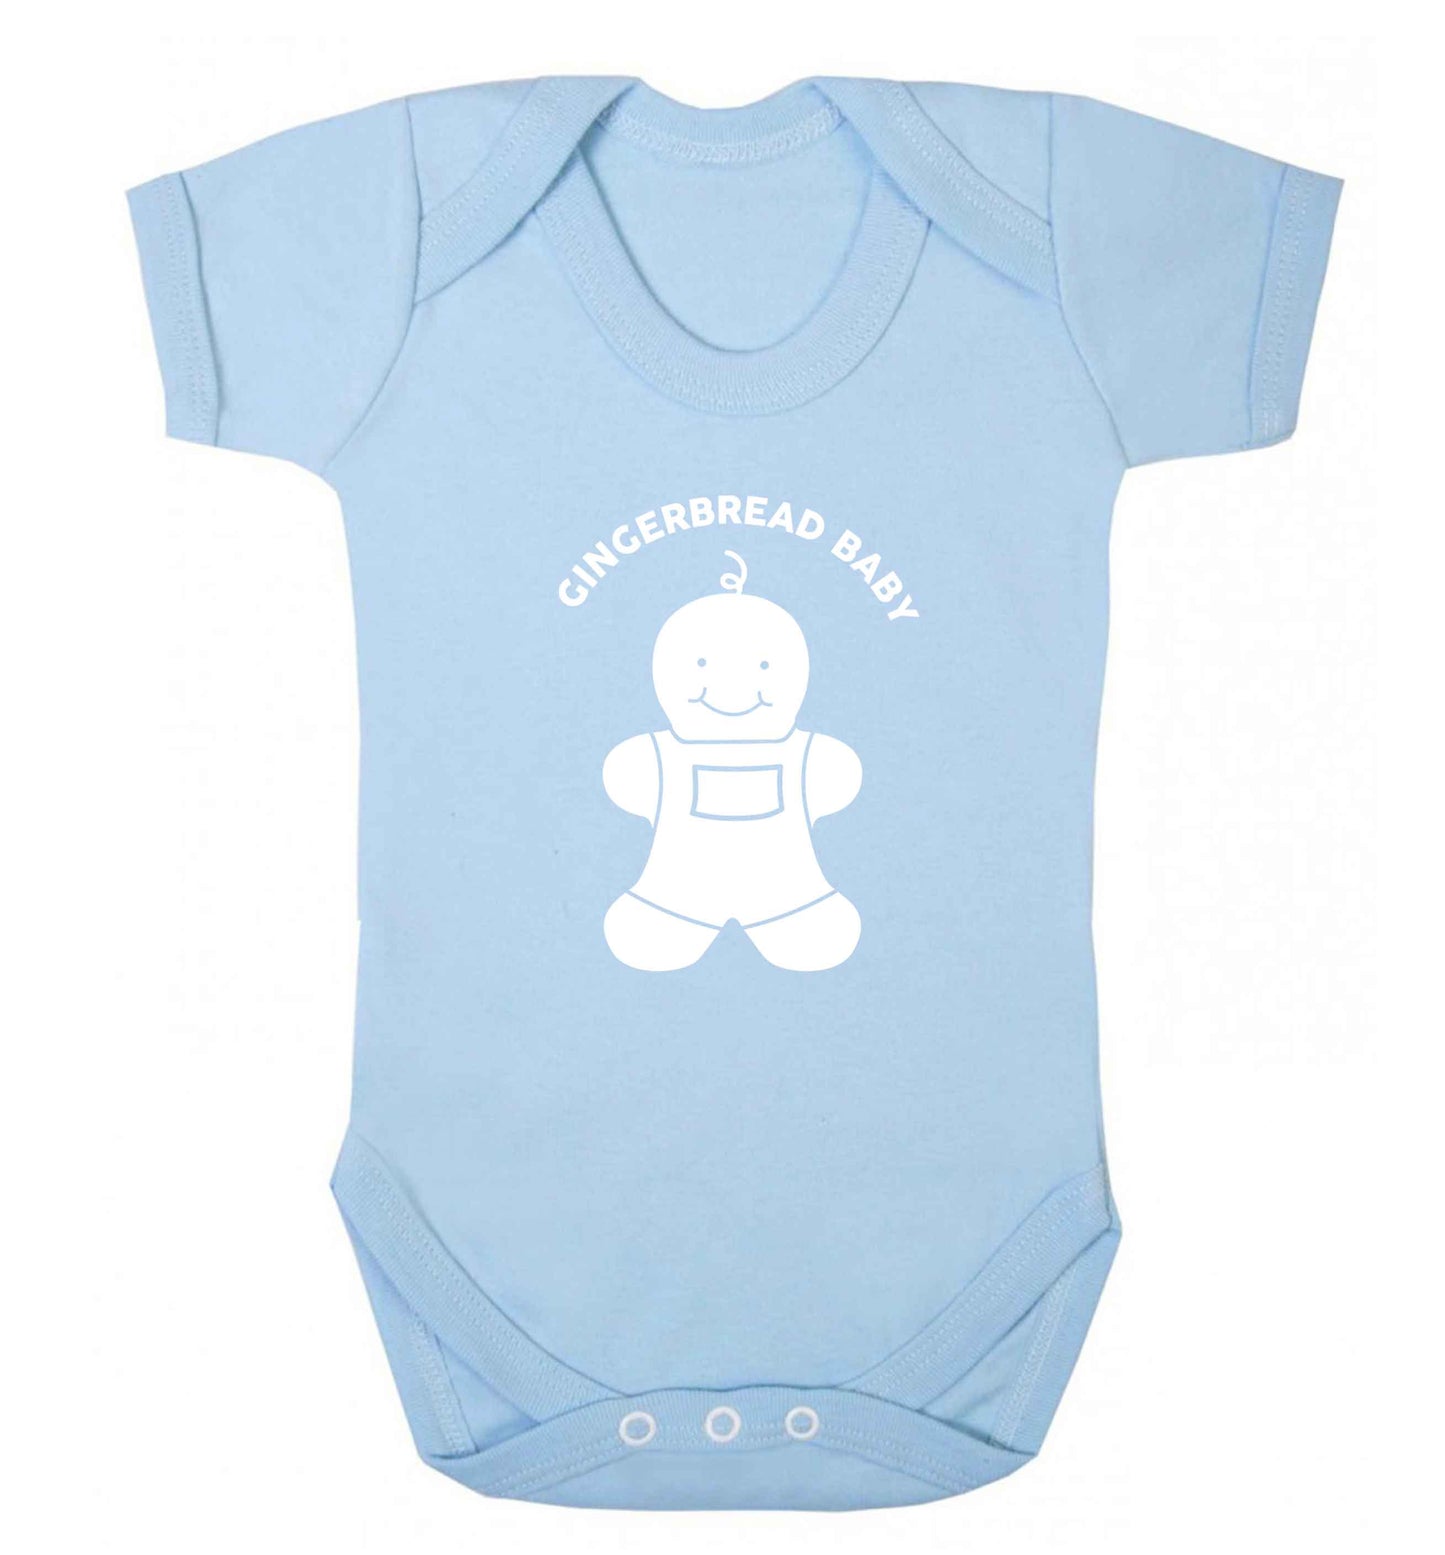 Gingerbread baby baby vest pale blue 18-24 months